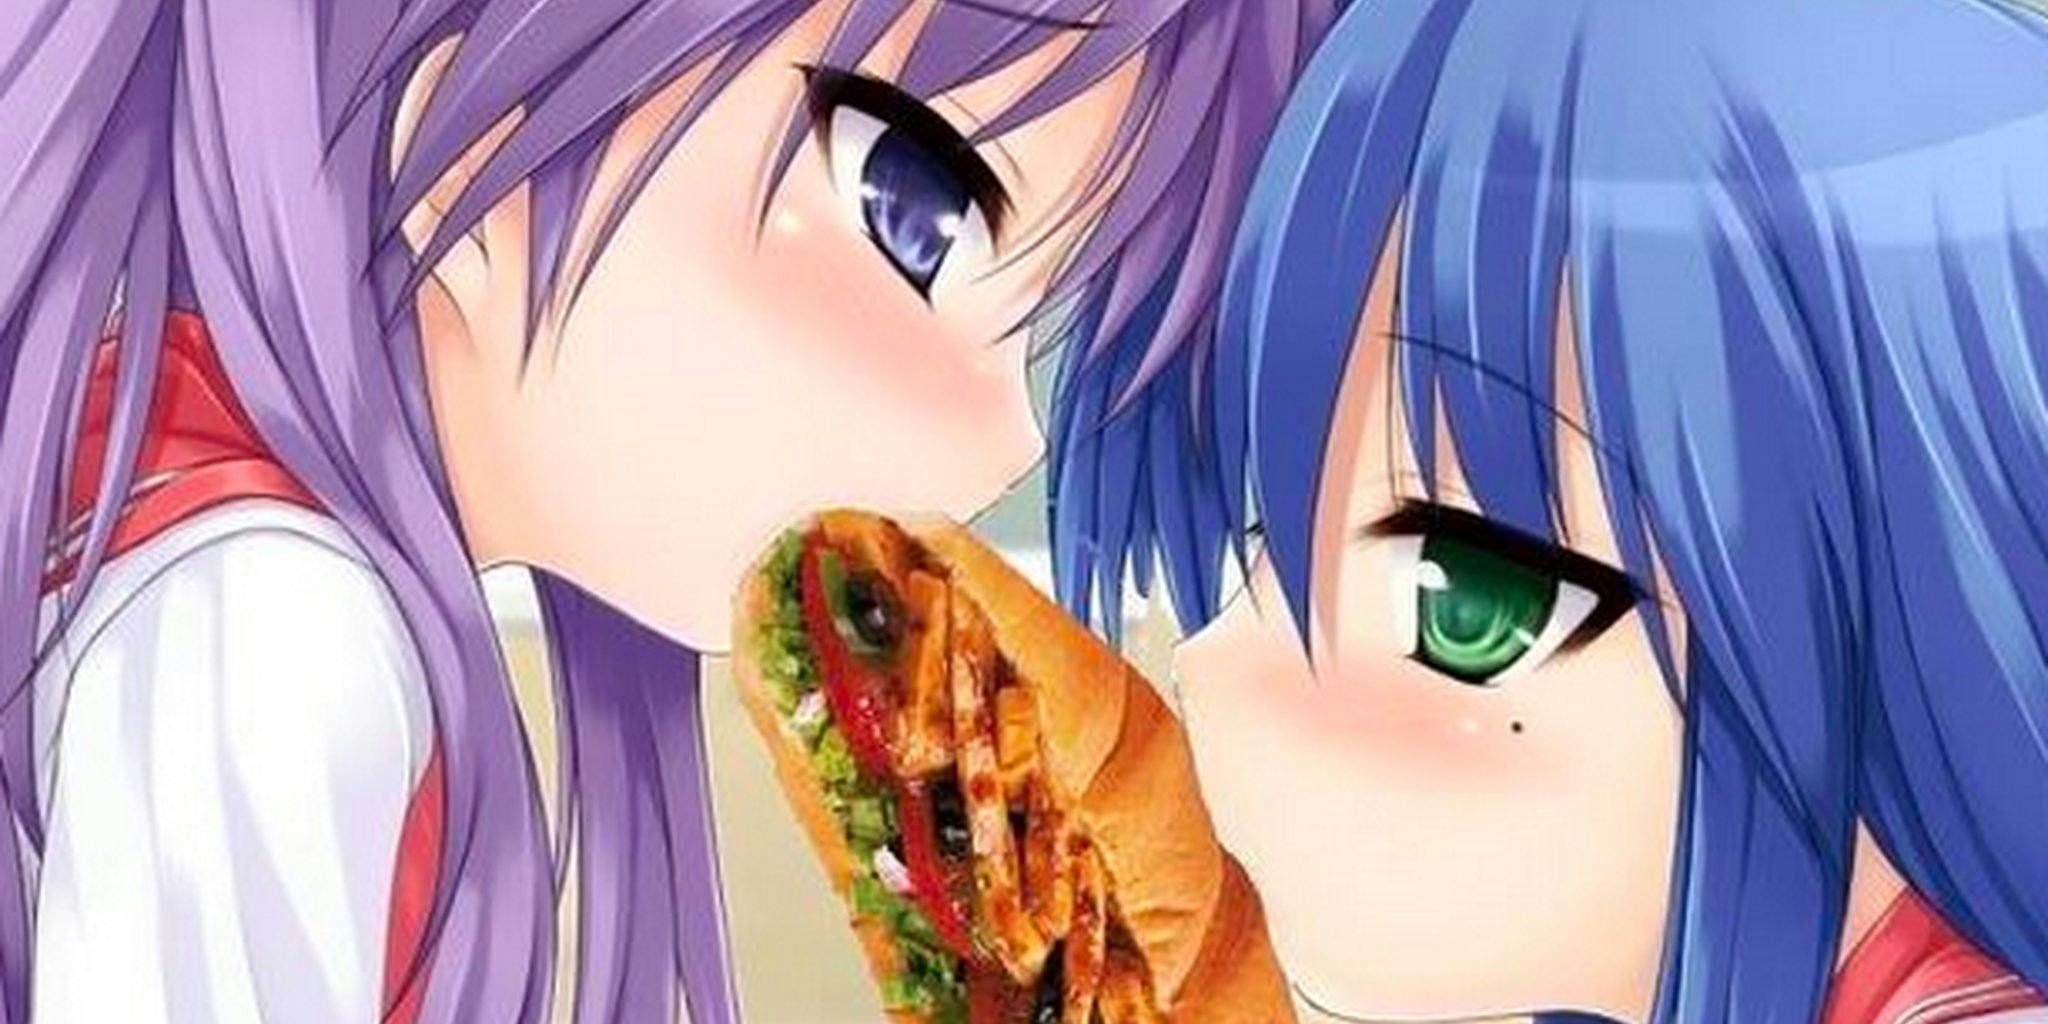 Pranksters flood Subway's Facebook page with anime sandwich porn.